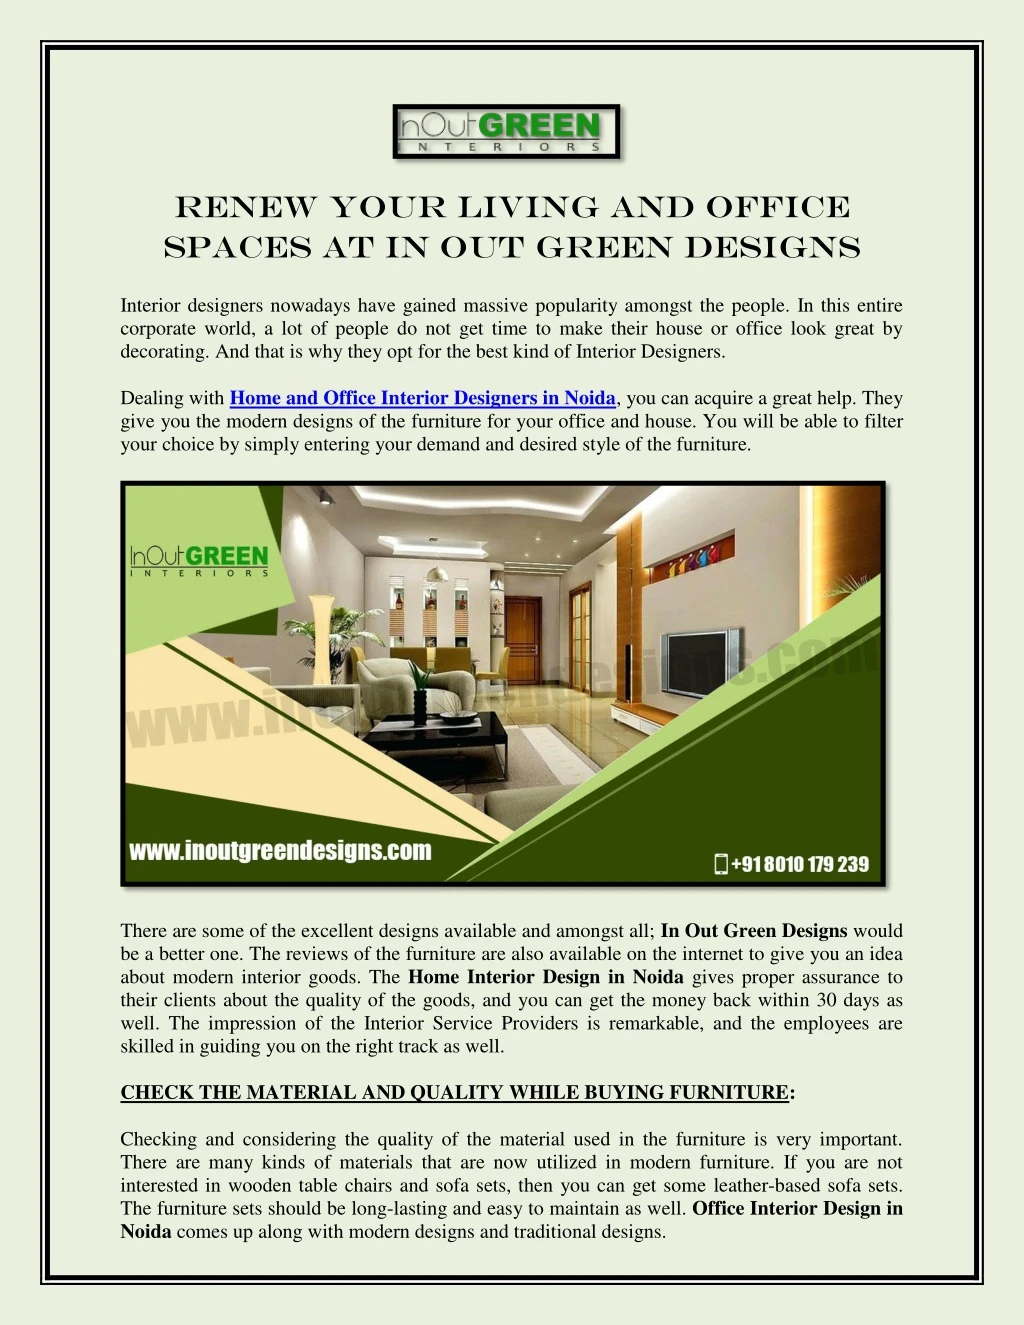 renew your living and office spaces